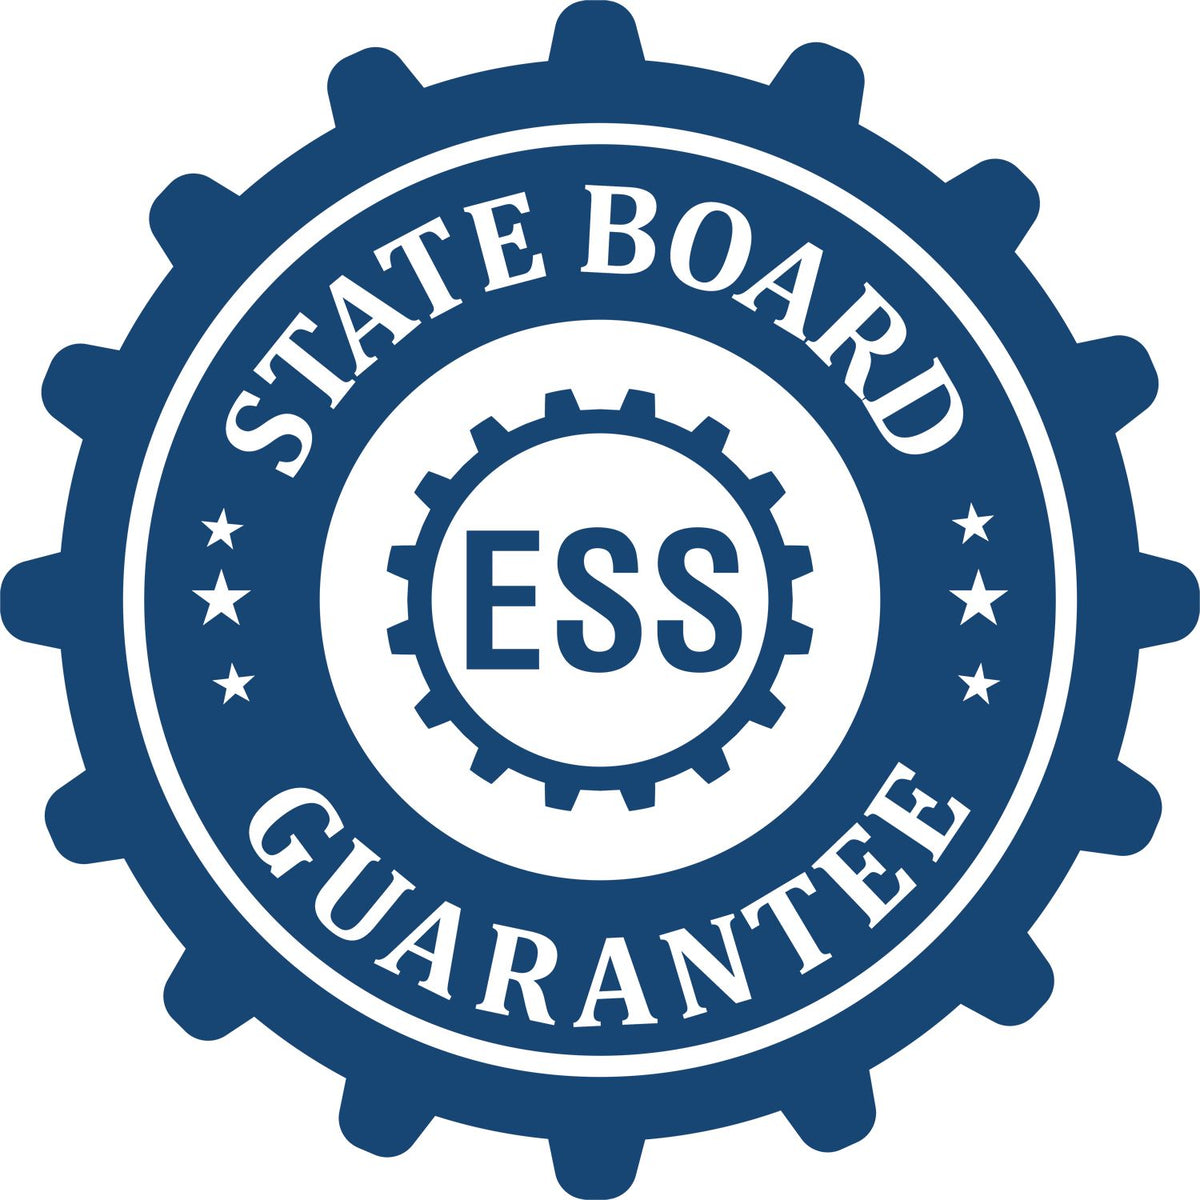 An emblem in a gear shape illustrating a state board guarantee for the Hybrid Indiana Geologist Seal